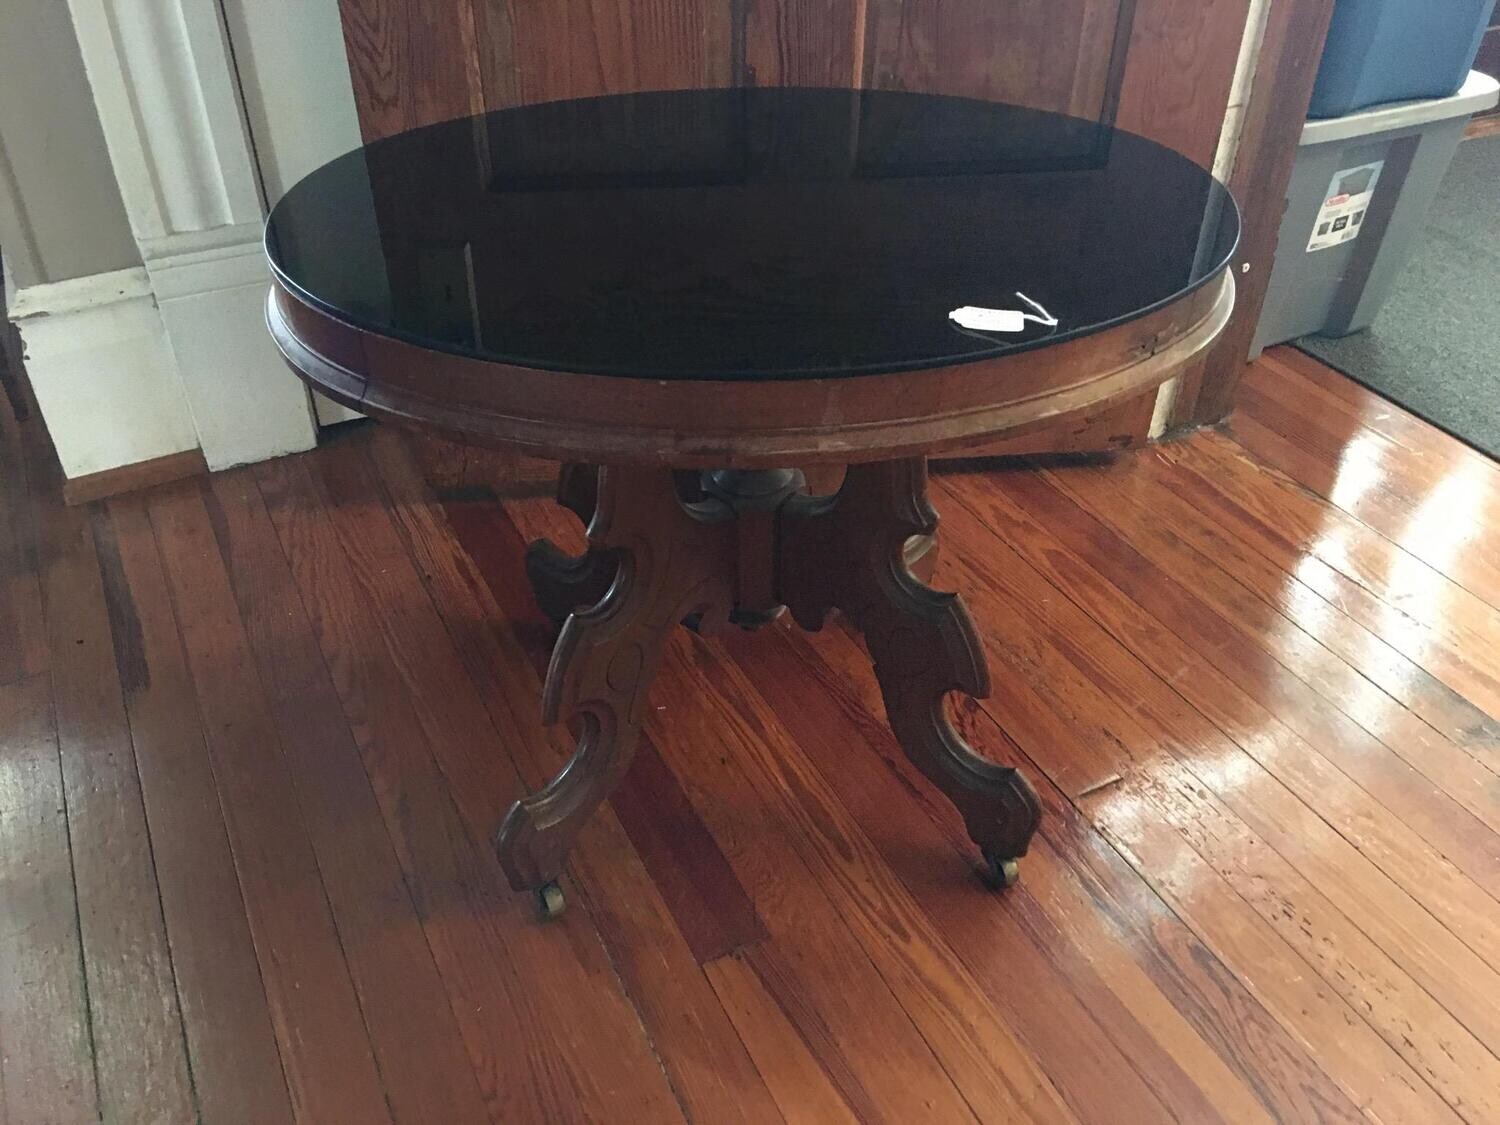 Antique Accent Table with wheels and black glass